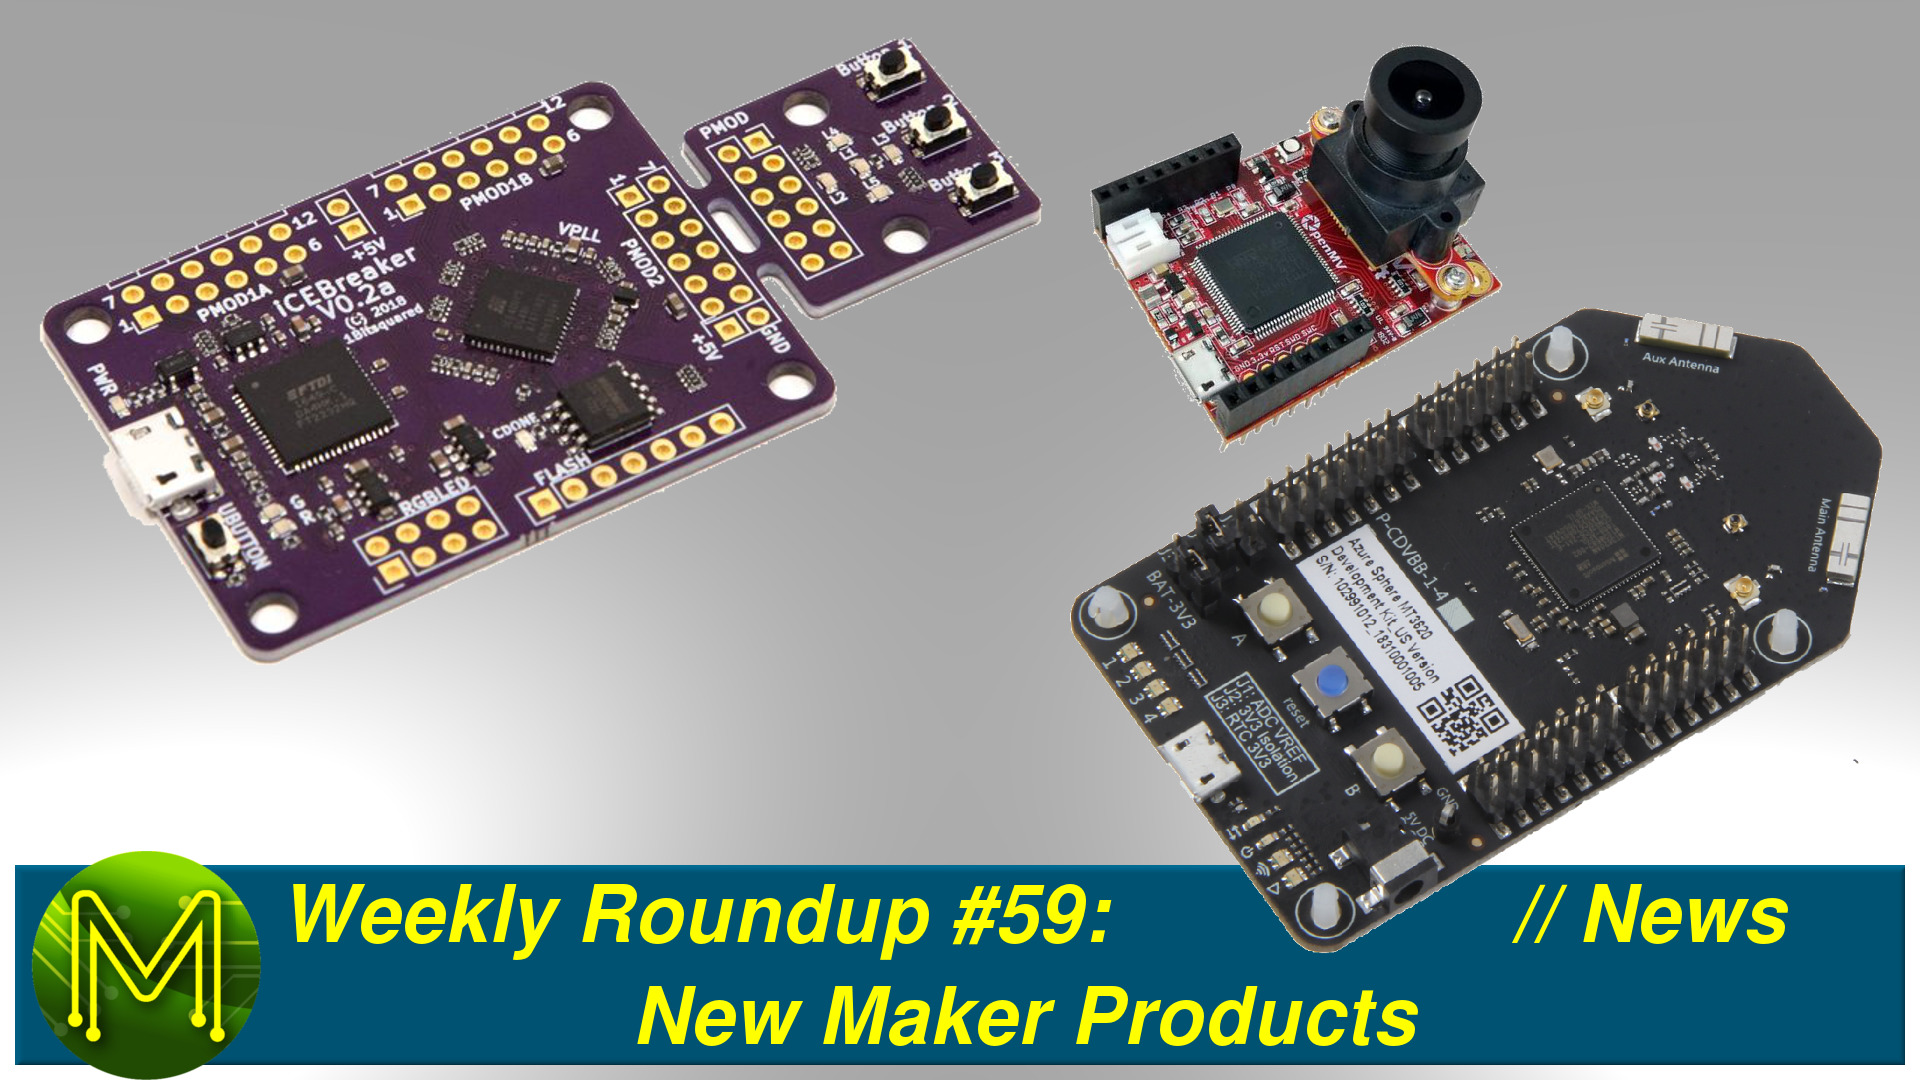 Weekly Roundup #59: New Maker Products // News